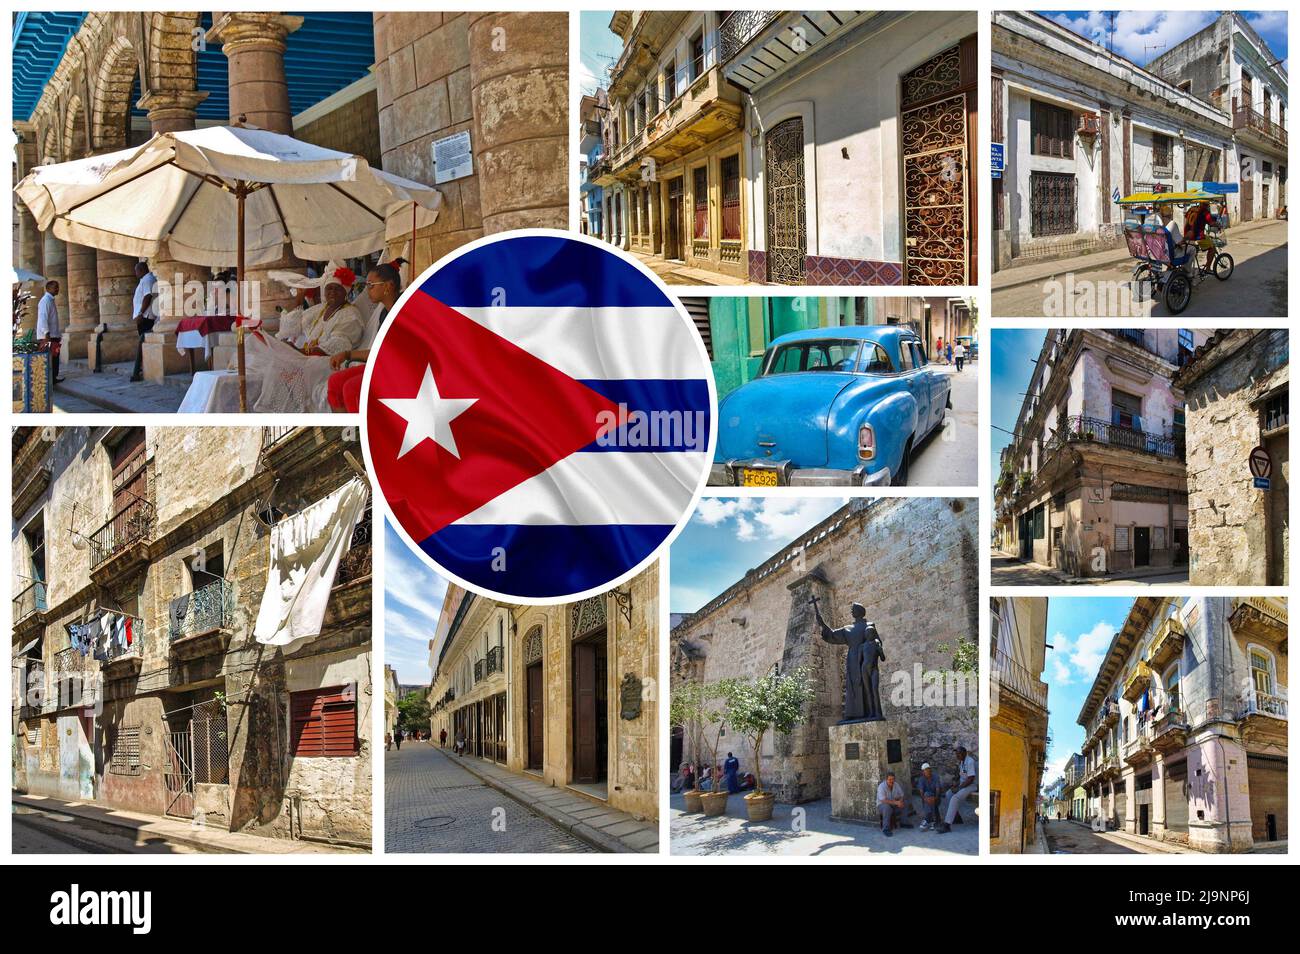 The other side of Havana (Cuba), the old part of the city, the genuine and non-touristic part where common people live. Stock Photo